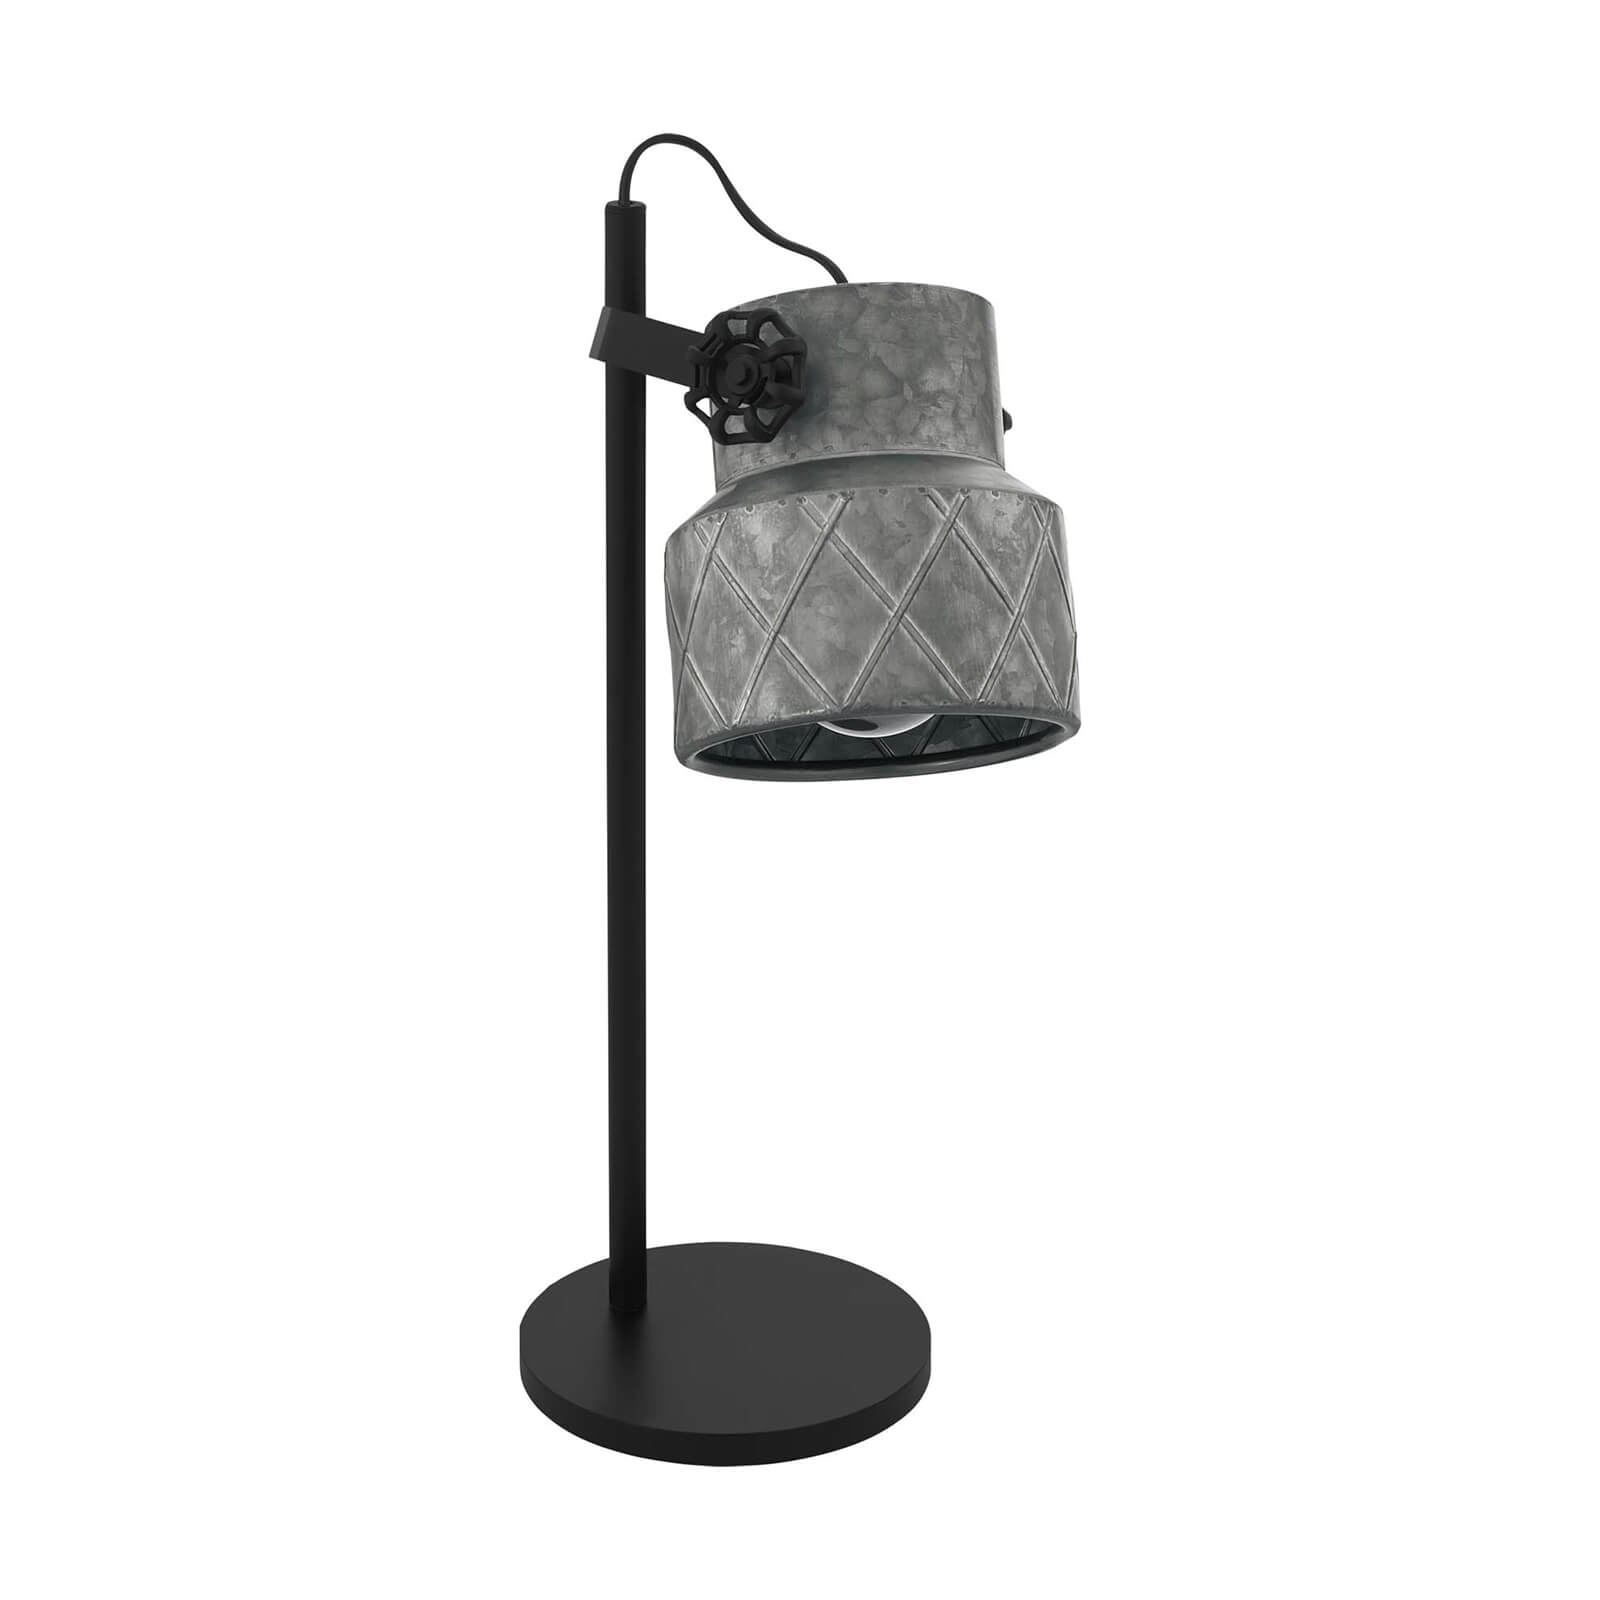 Eglo Hilcott Industrial Black and Grey Table Lamp